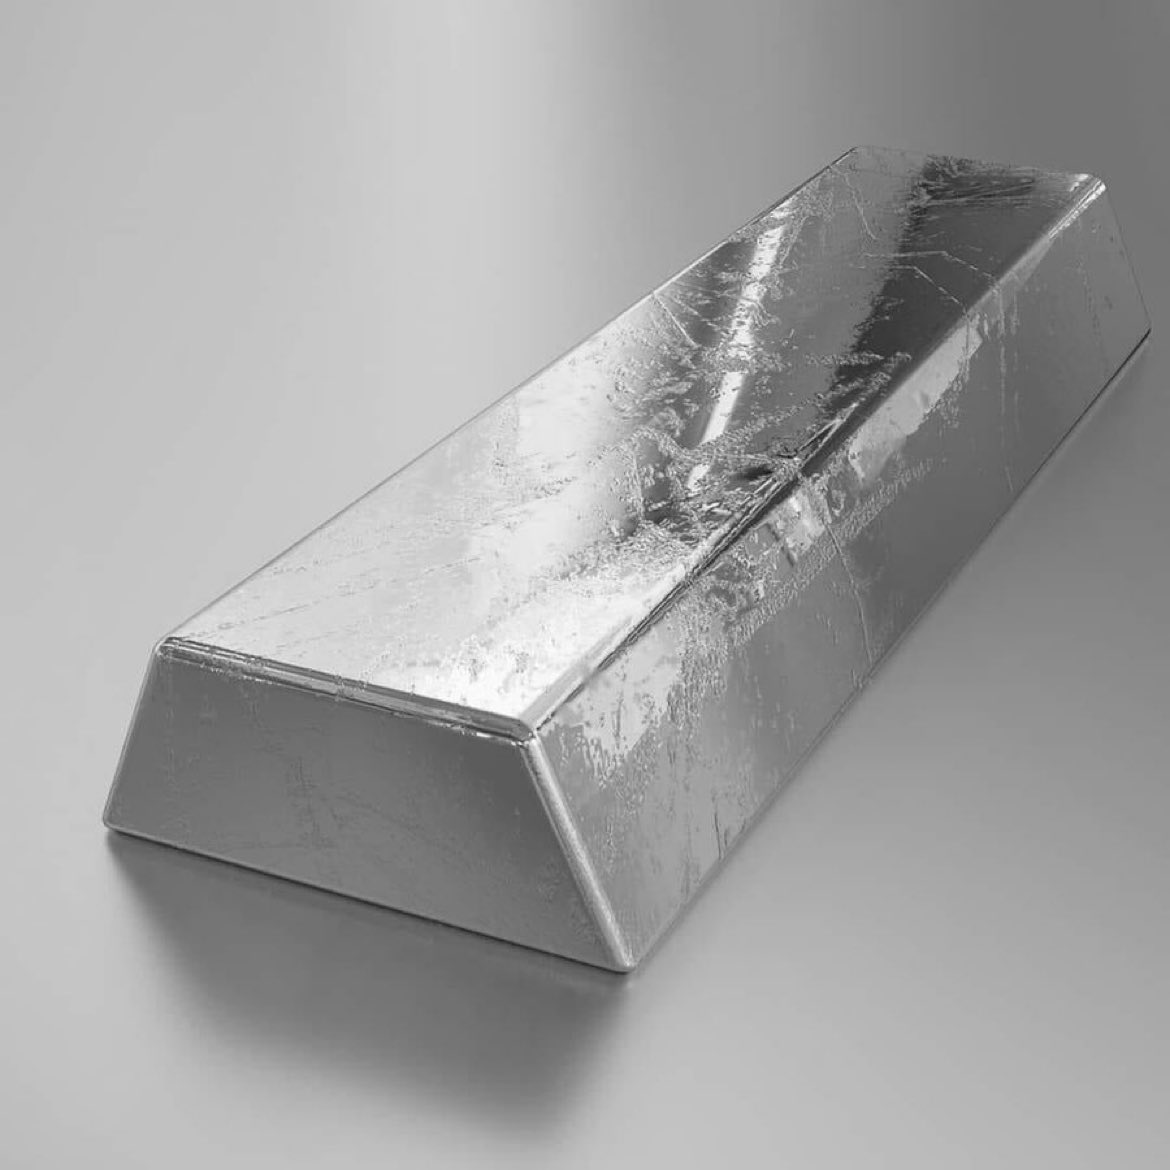 Consul of Ghana to Italy on X: This is an iron ingot, its value is about  100 dollars. If it was used iron it would be worth about $25. If you decide